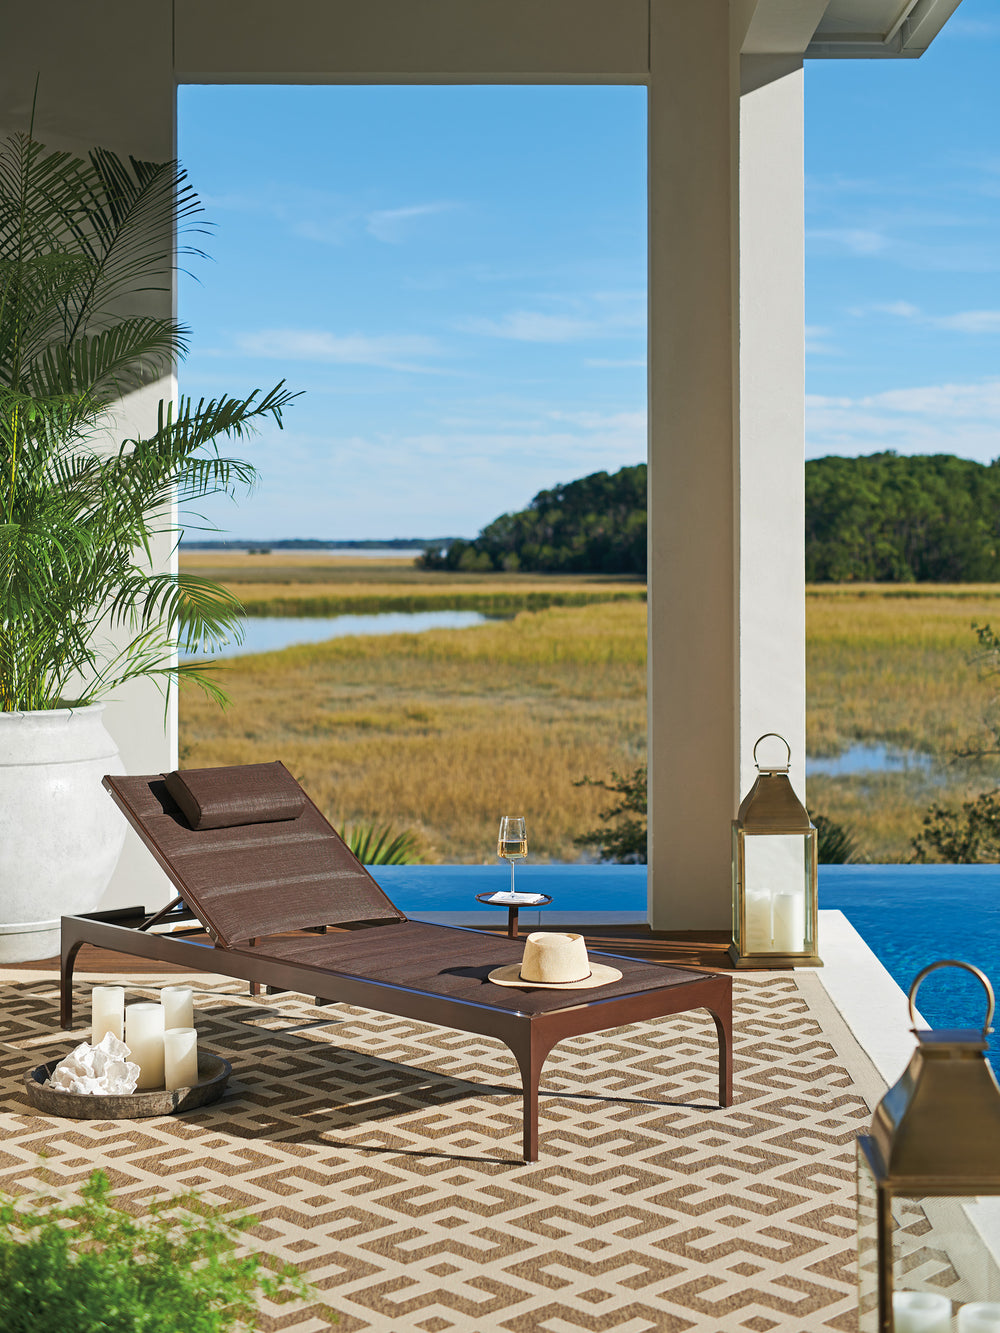 American Home Furniture | Tommy Bahama Outdoor  - Abaco Chaise Lounge